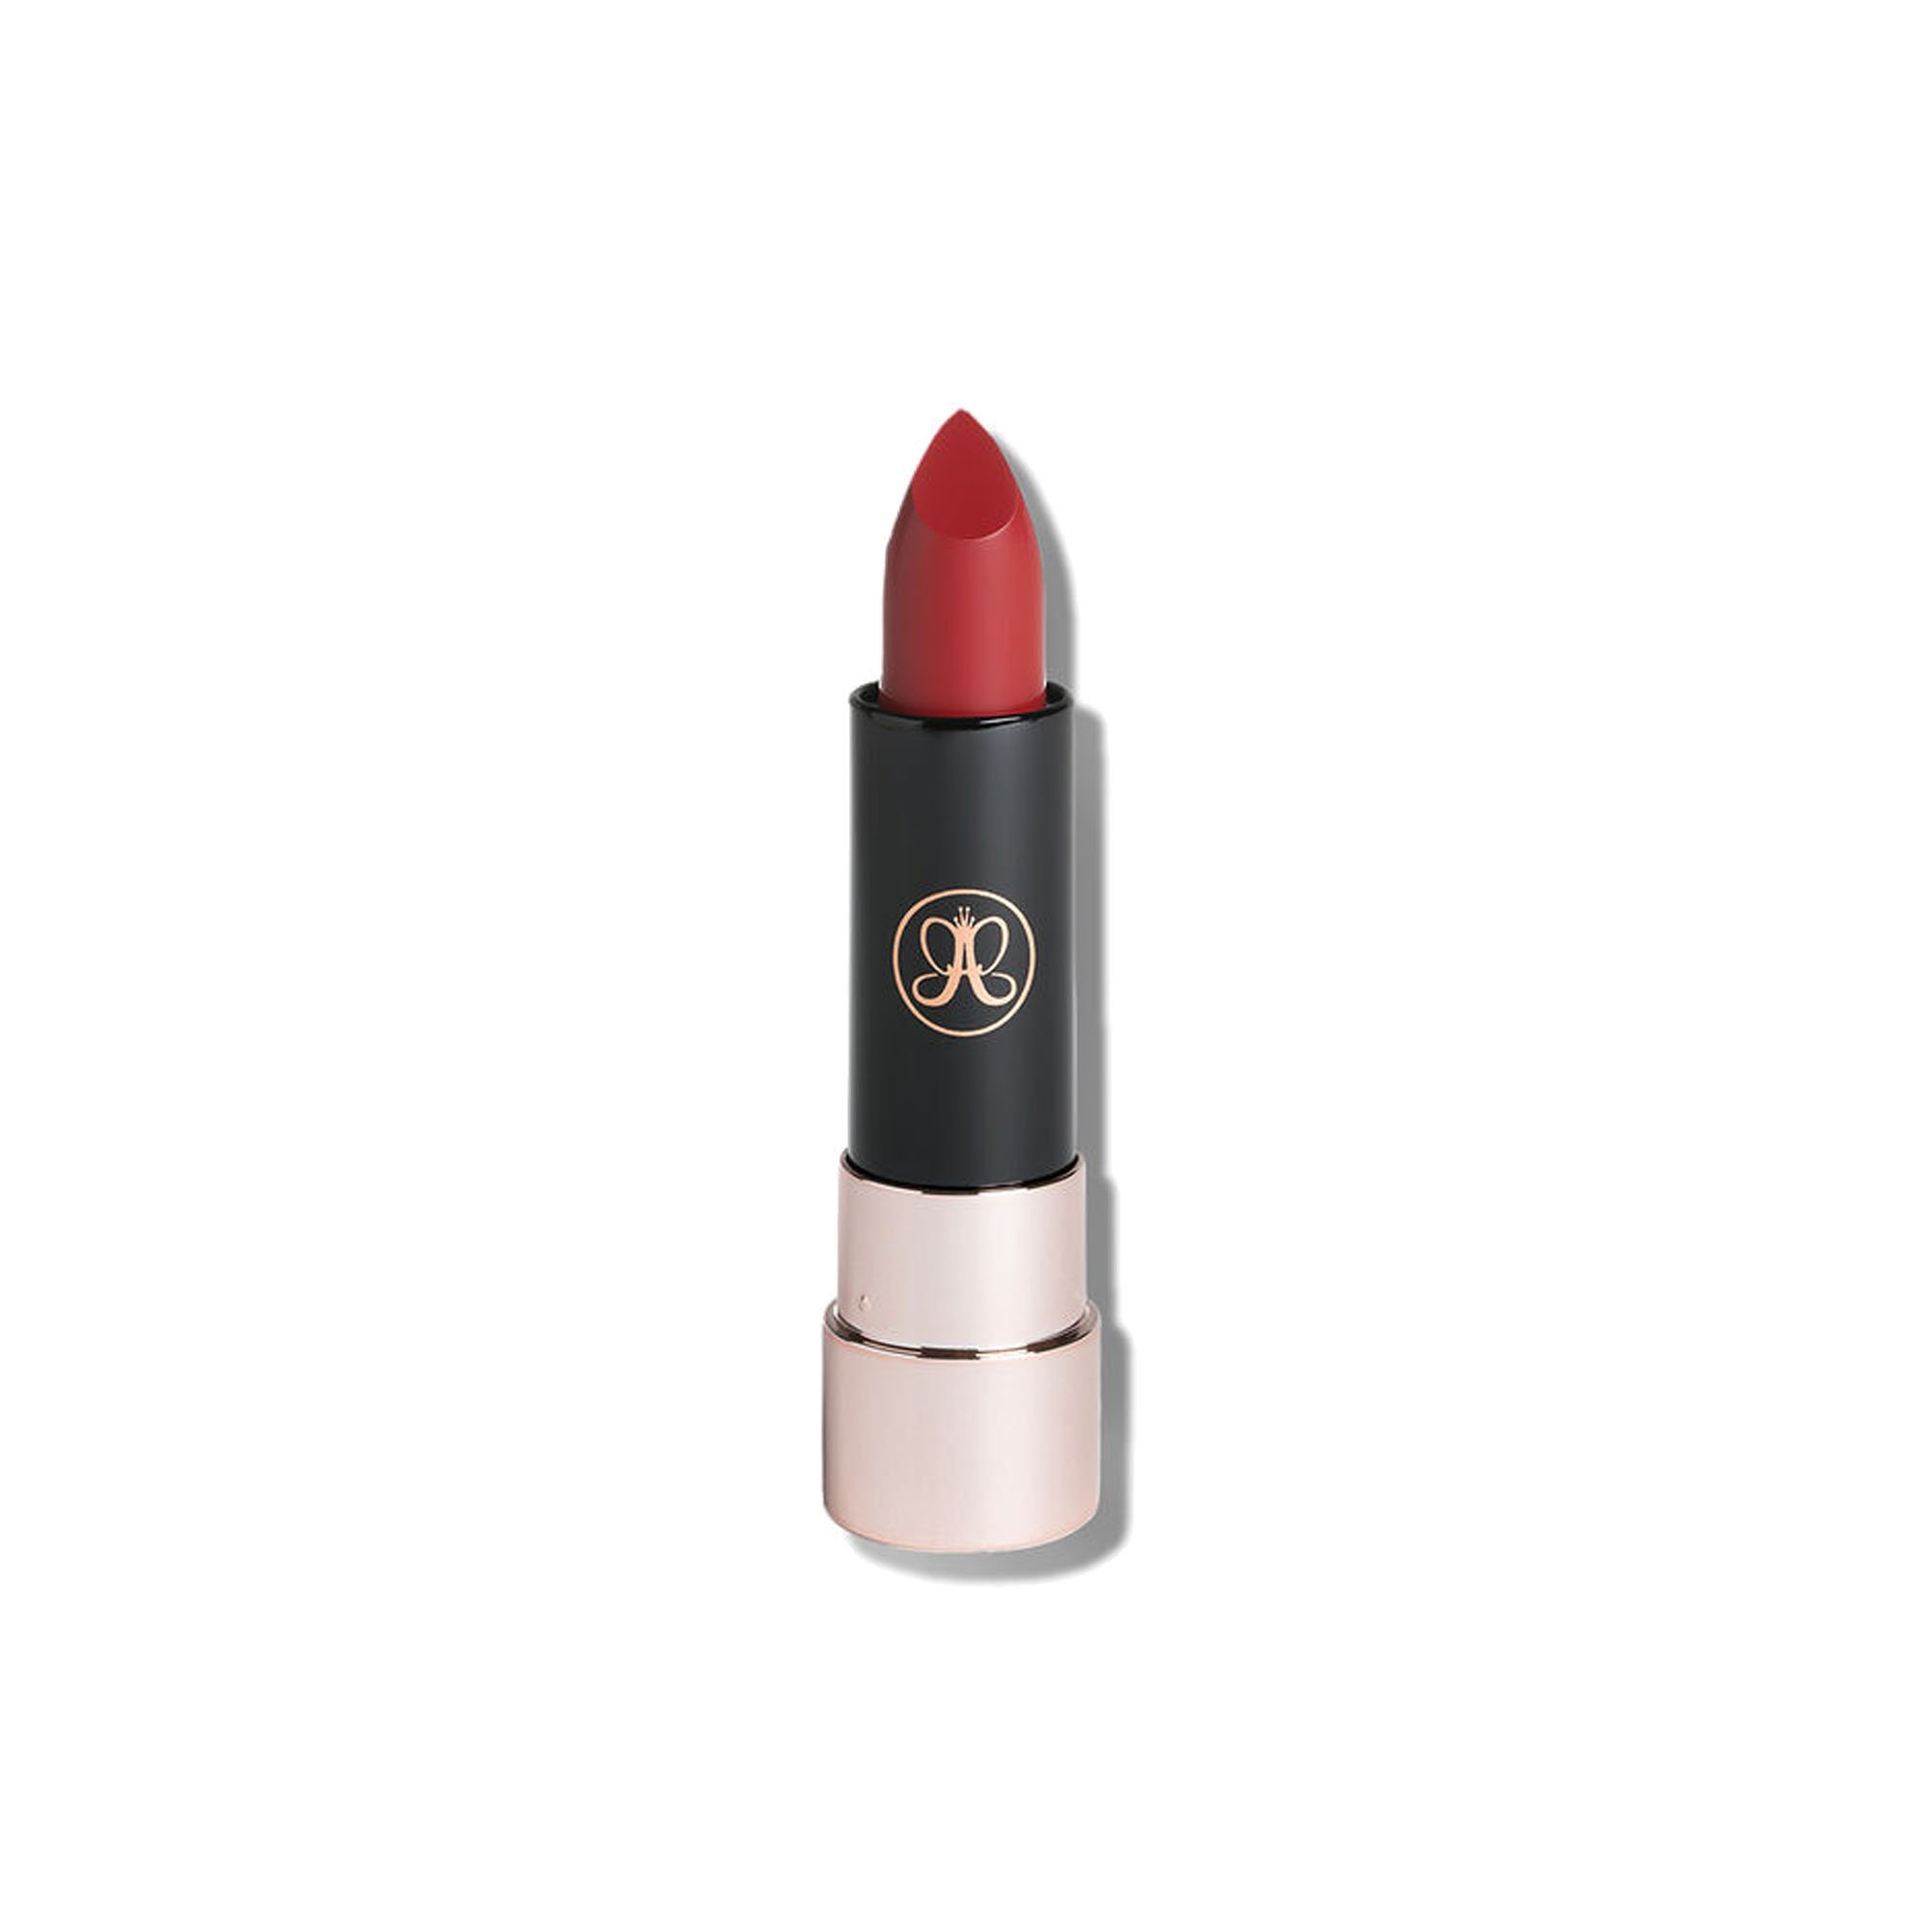 Copy of BEAUTY BAR_ANASTASIA BEVERLY HILLS MATTE LIPSTICK IN RUBY - TRUE RED_PHP1200.jpg